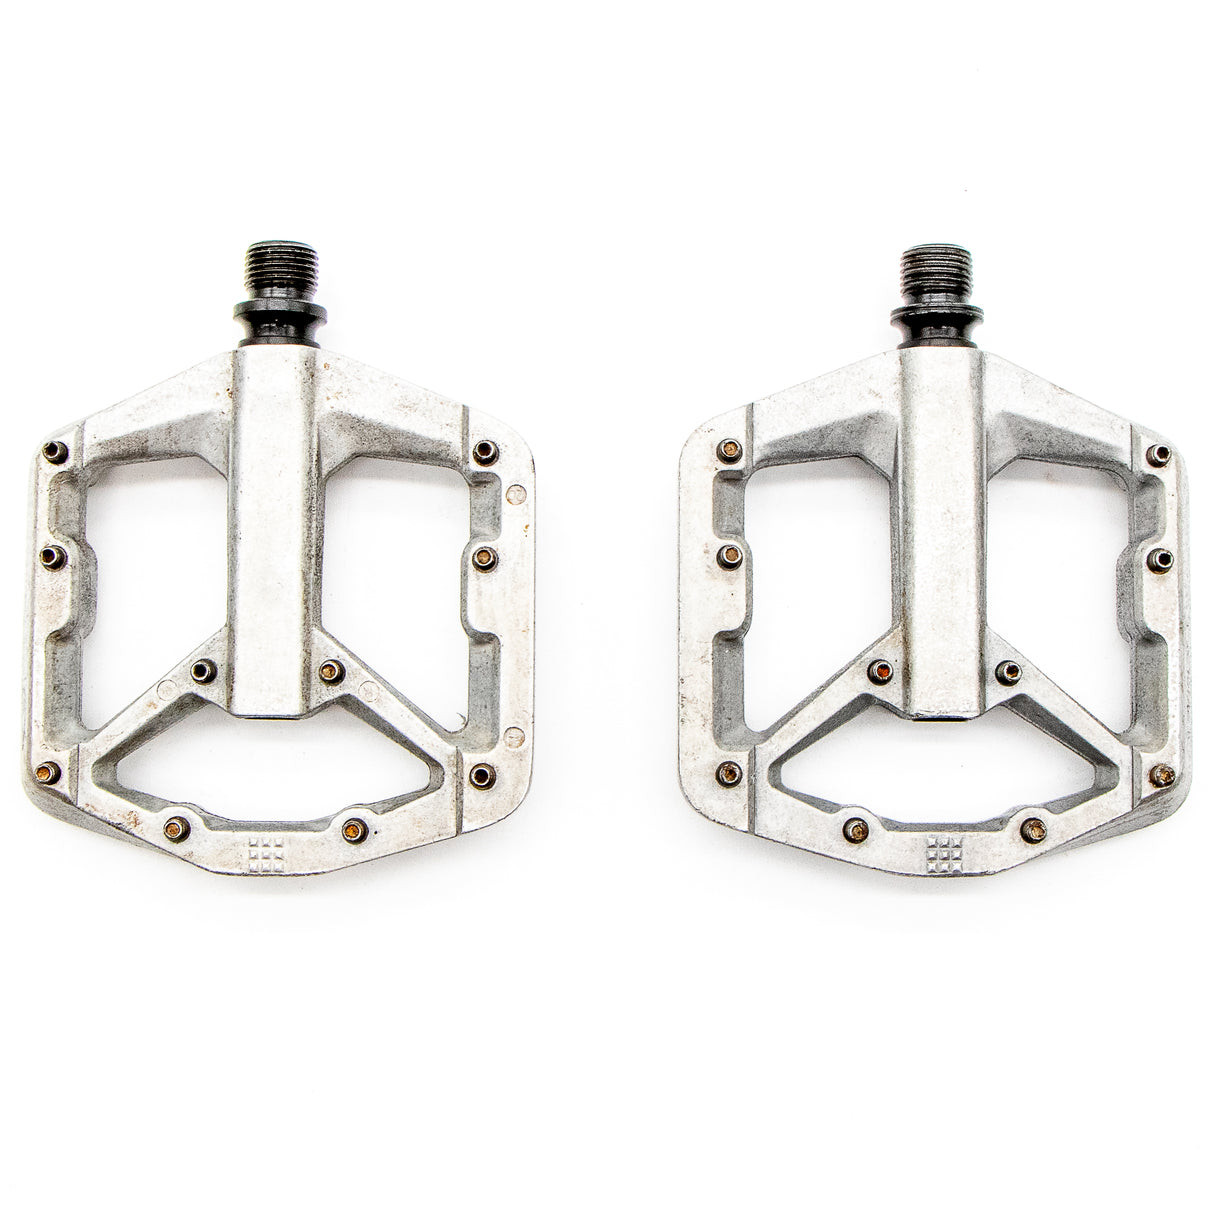 Crank Brothers Stamp 2 Small Raw MTB Pedals 447g